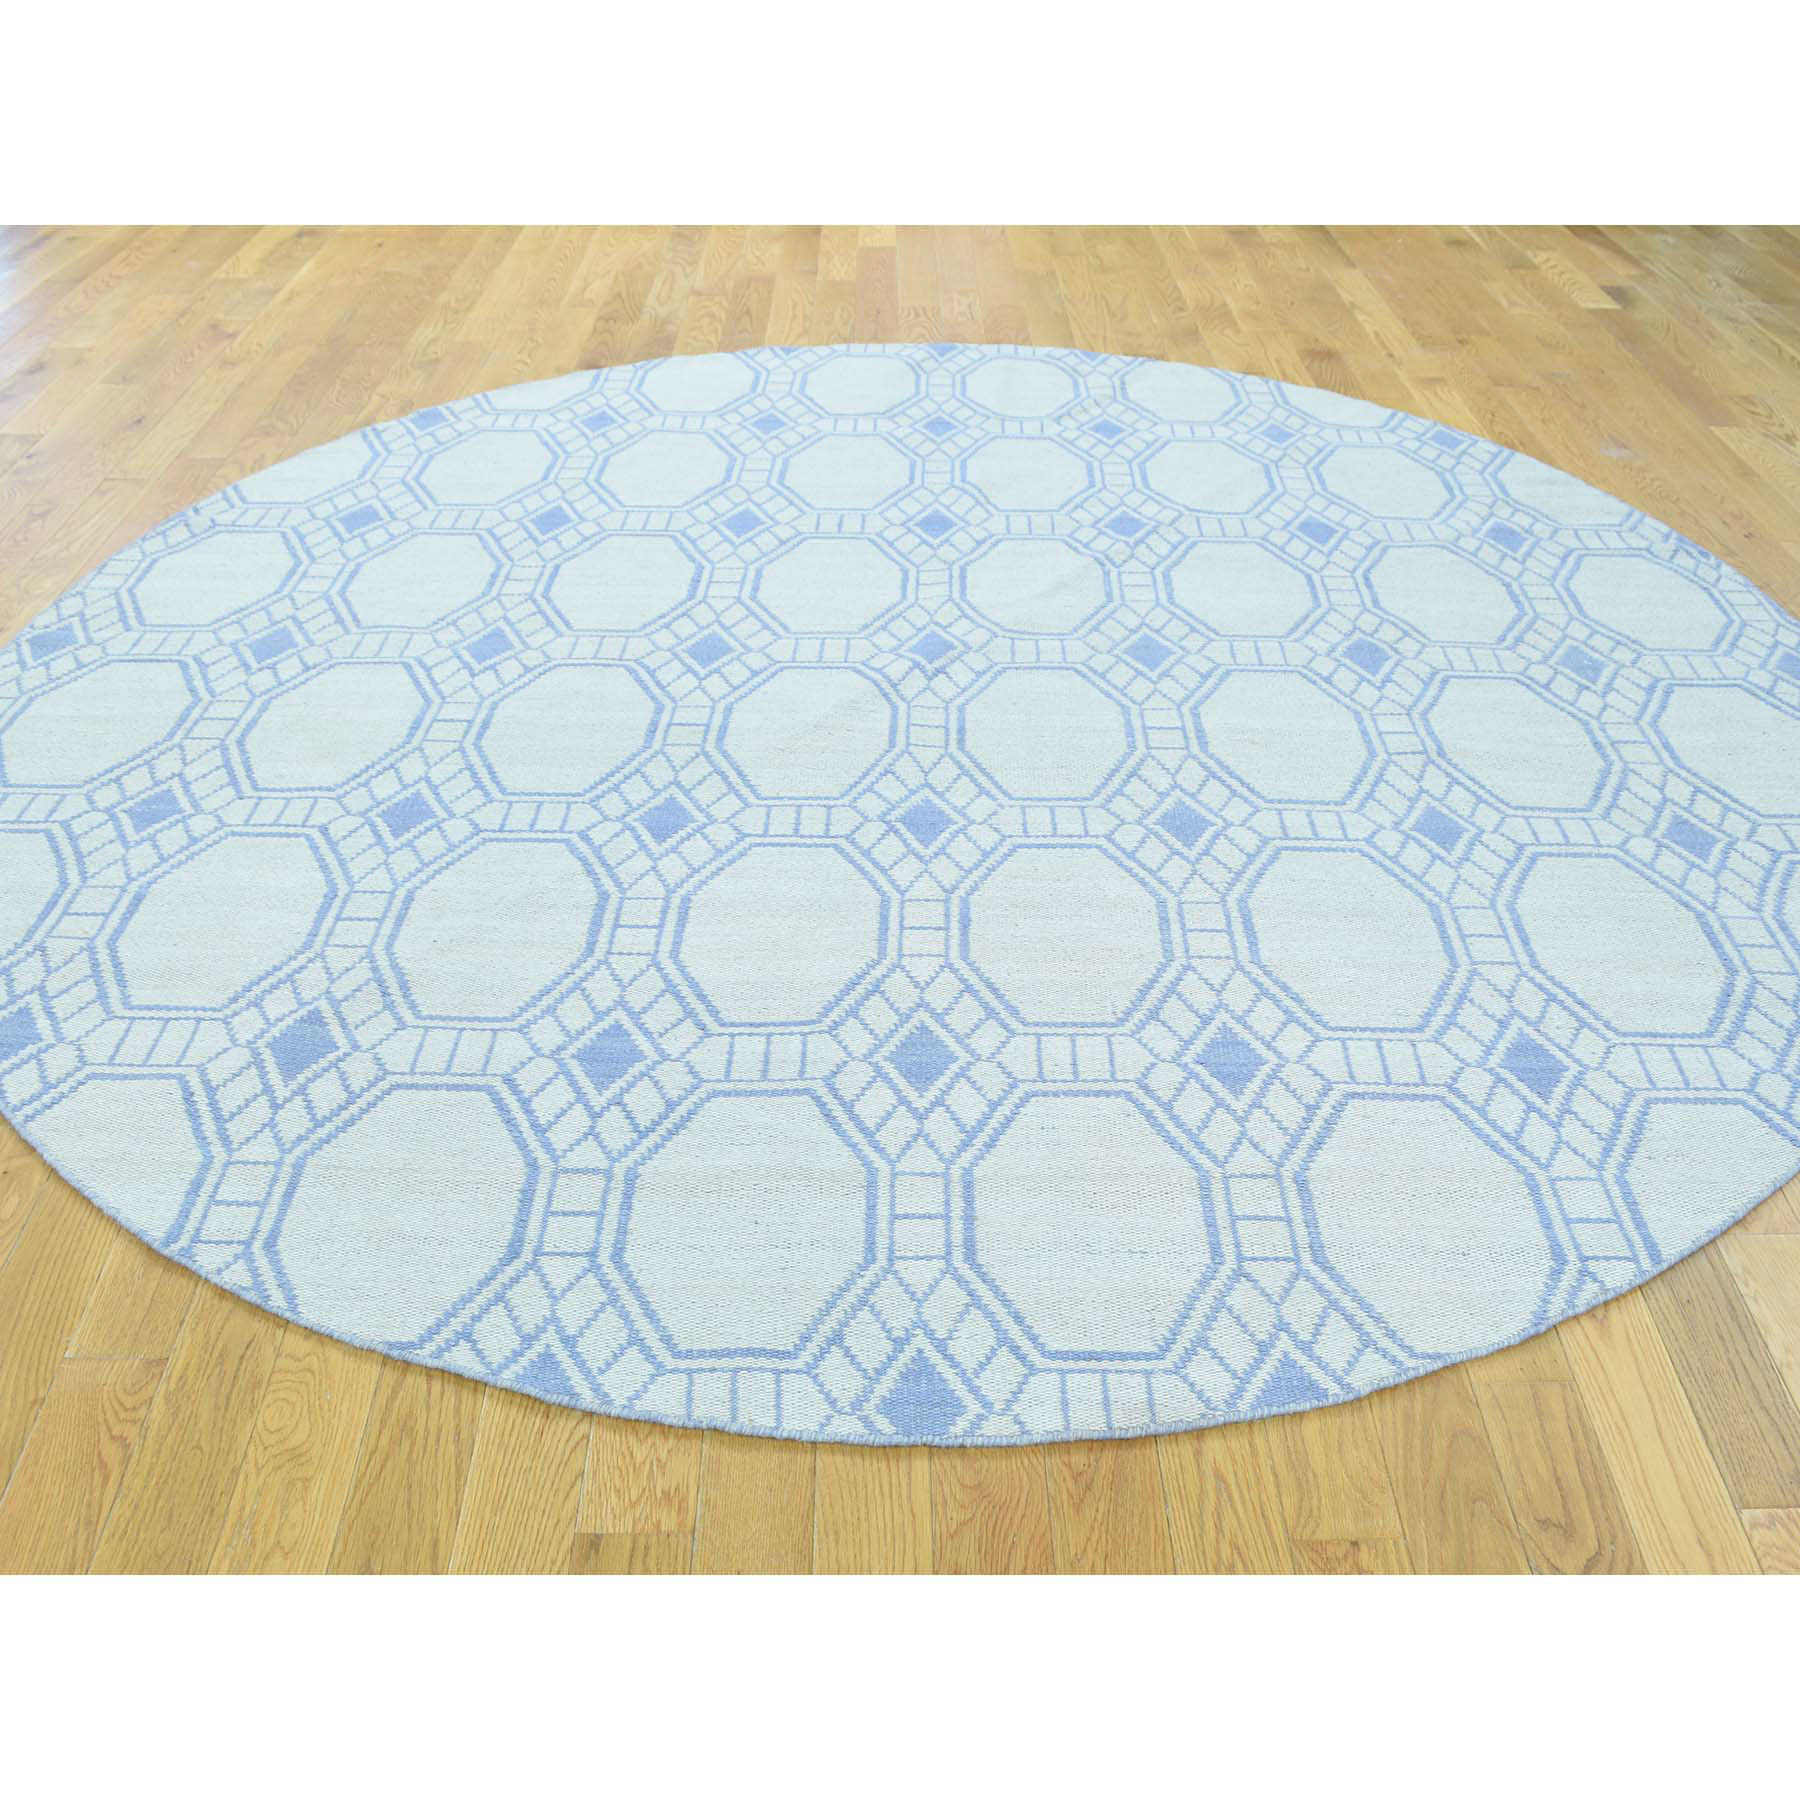 7-10 x7-10  Flat Weave Hand-Woven Reversible Durie Kilim Round Rug 